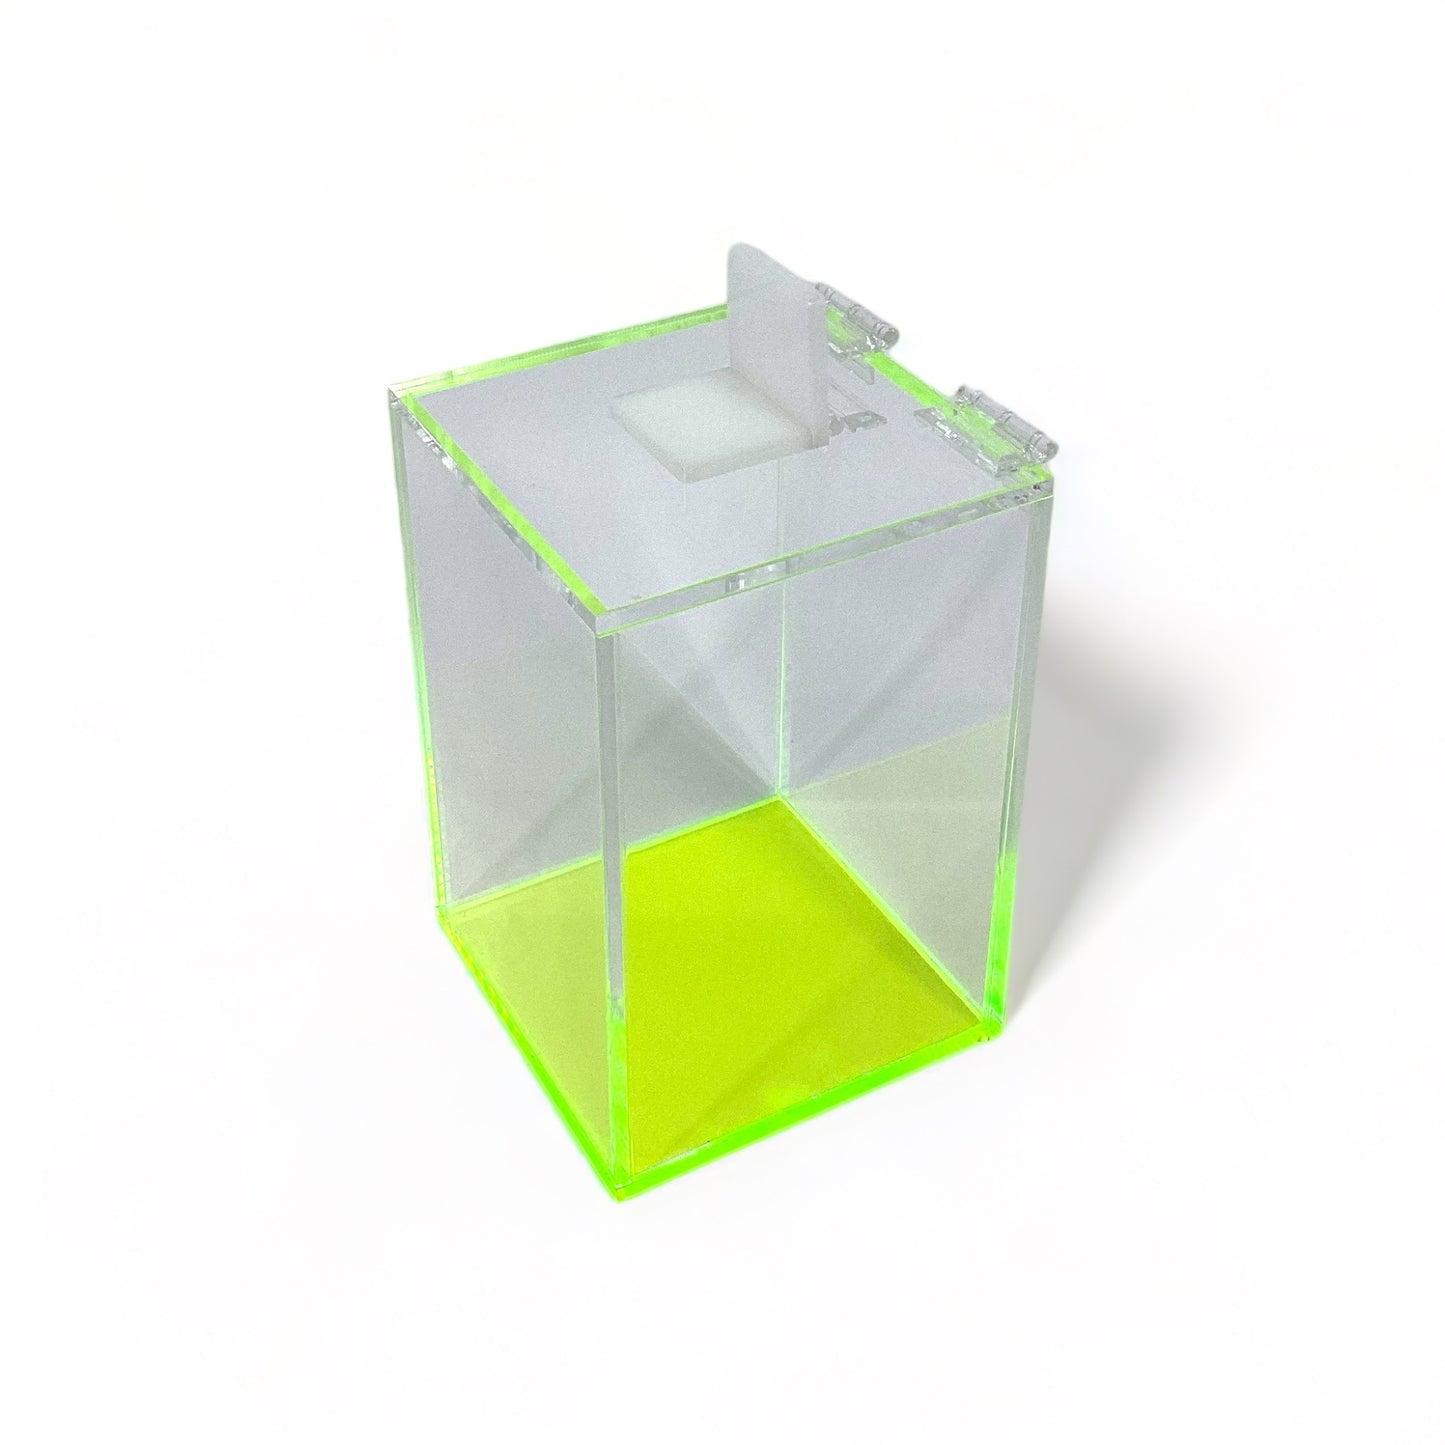 Acrylic Medical/Lab Disposal Box - For Needles, Pipette Tips, Vials and More